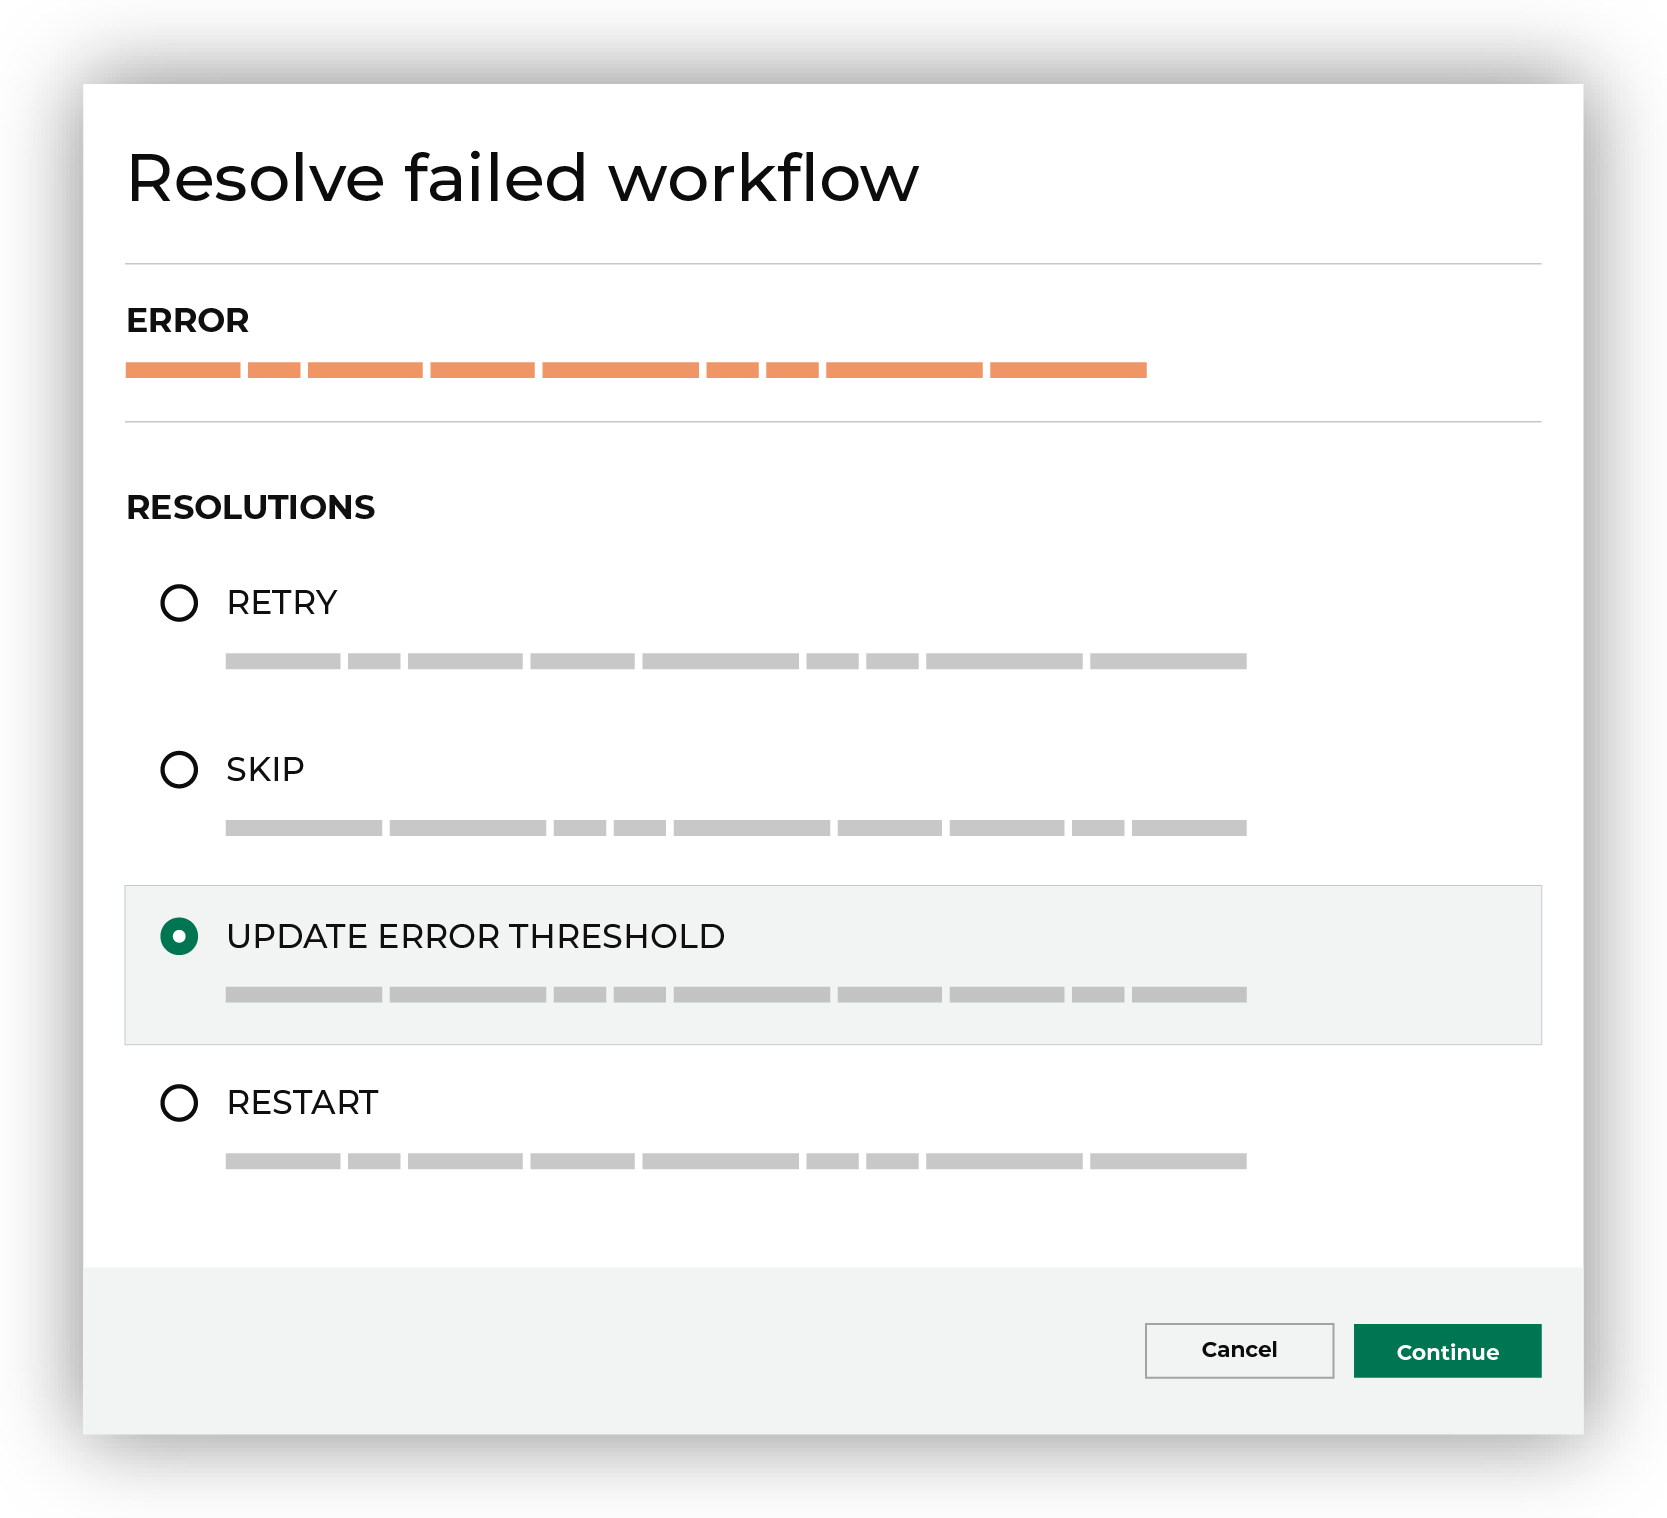 An example of the workflow actions for a specific workflow error.